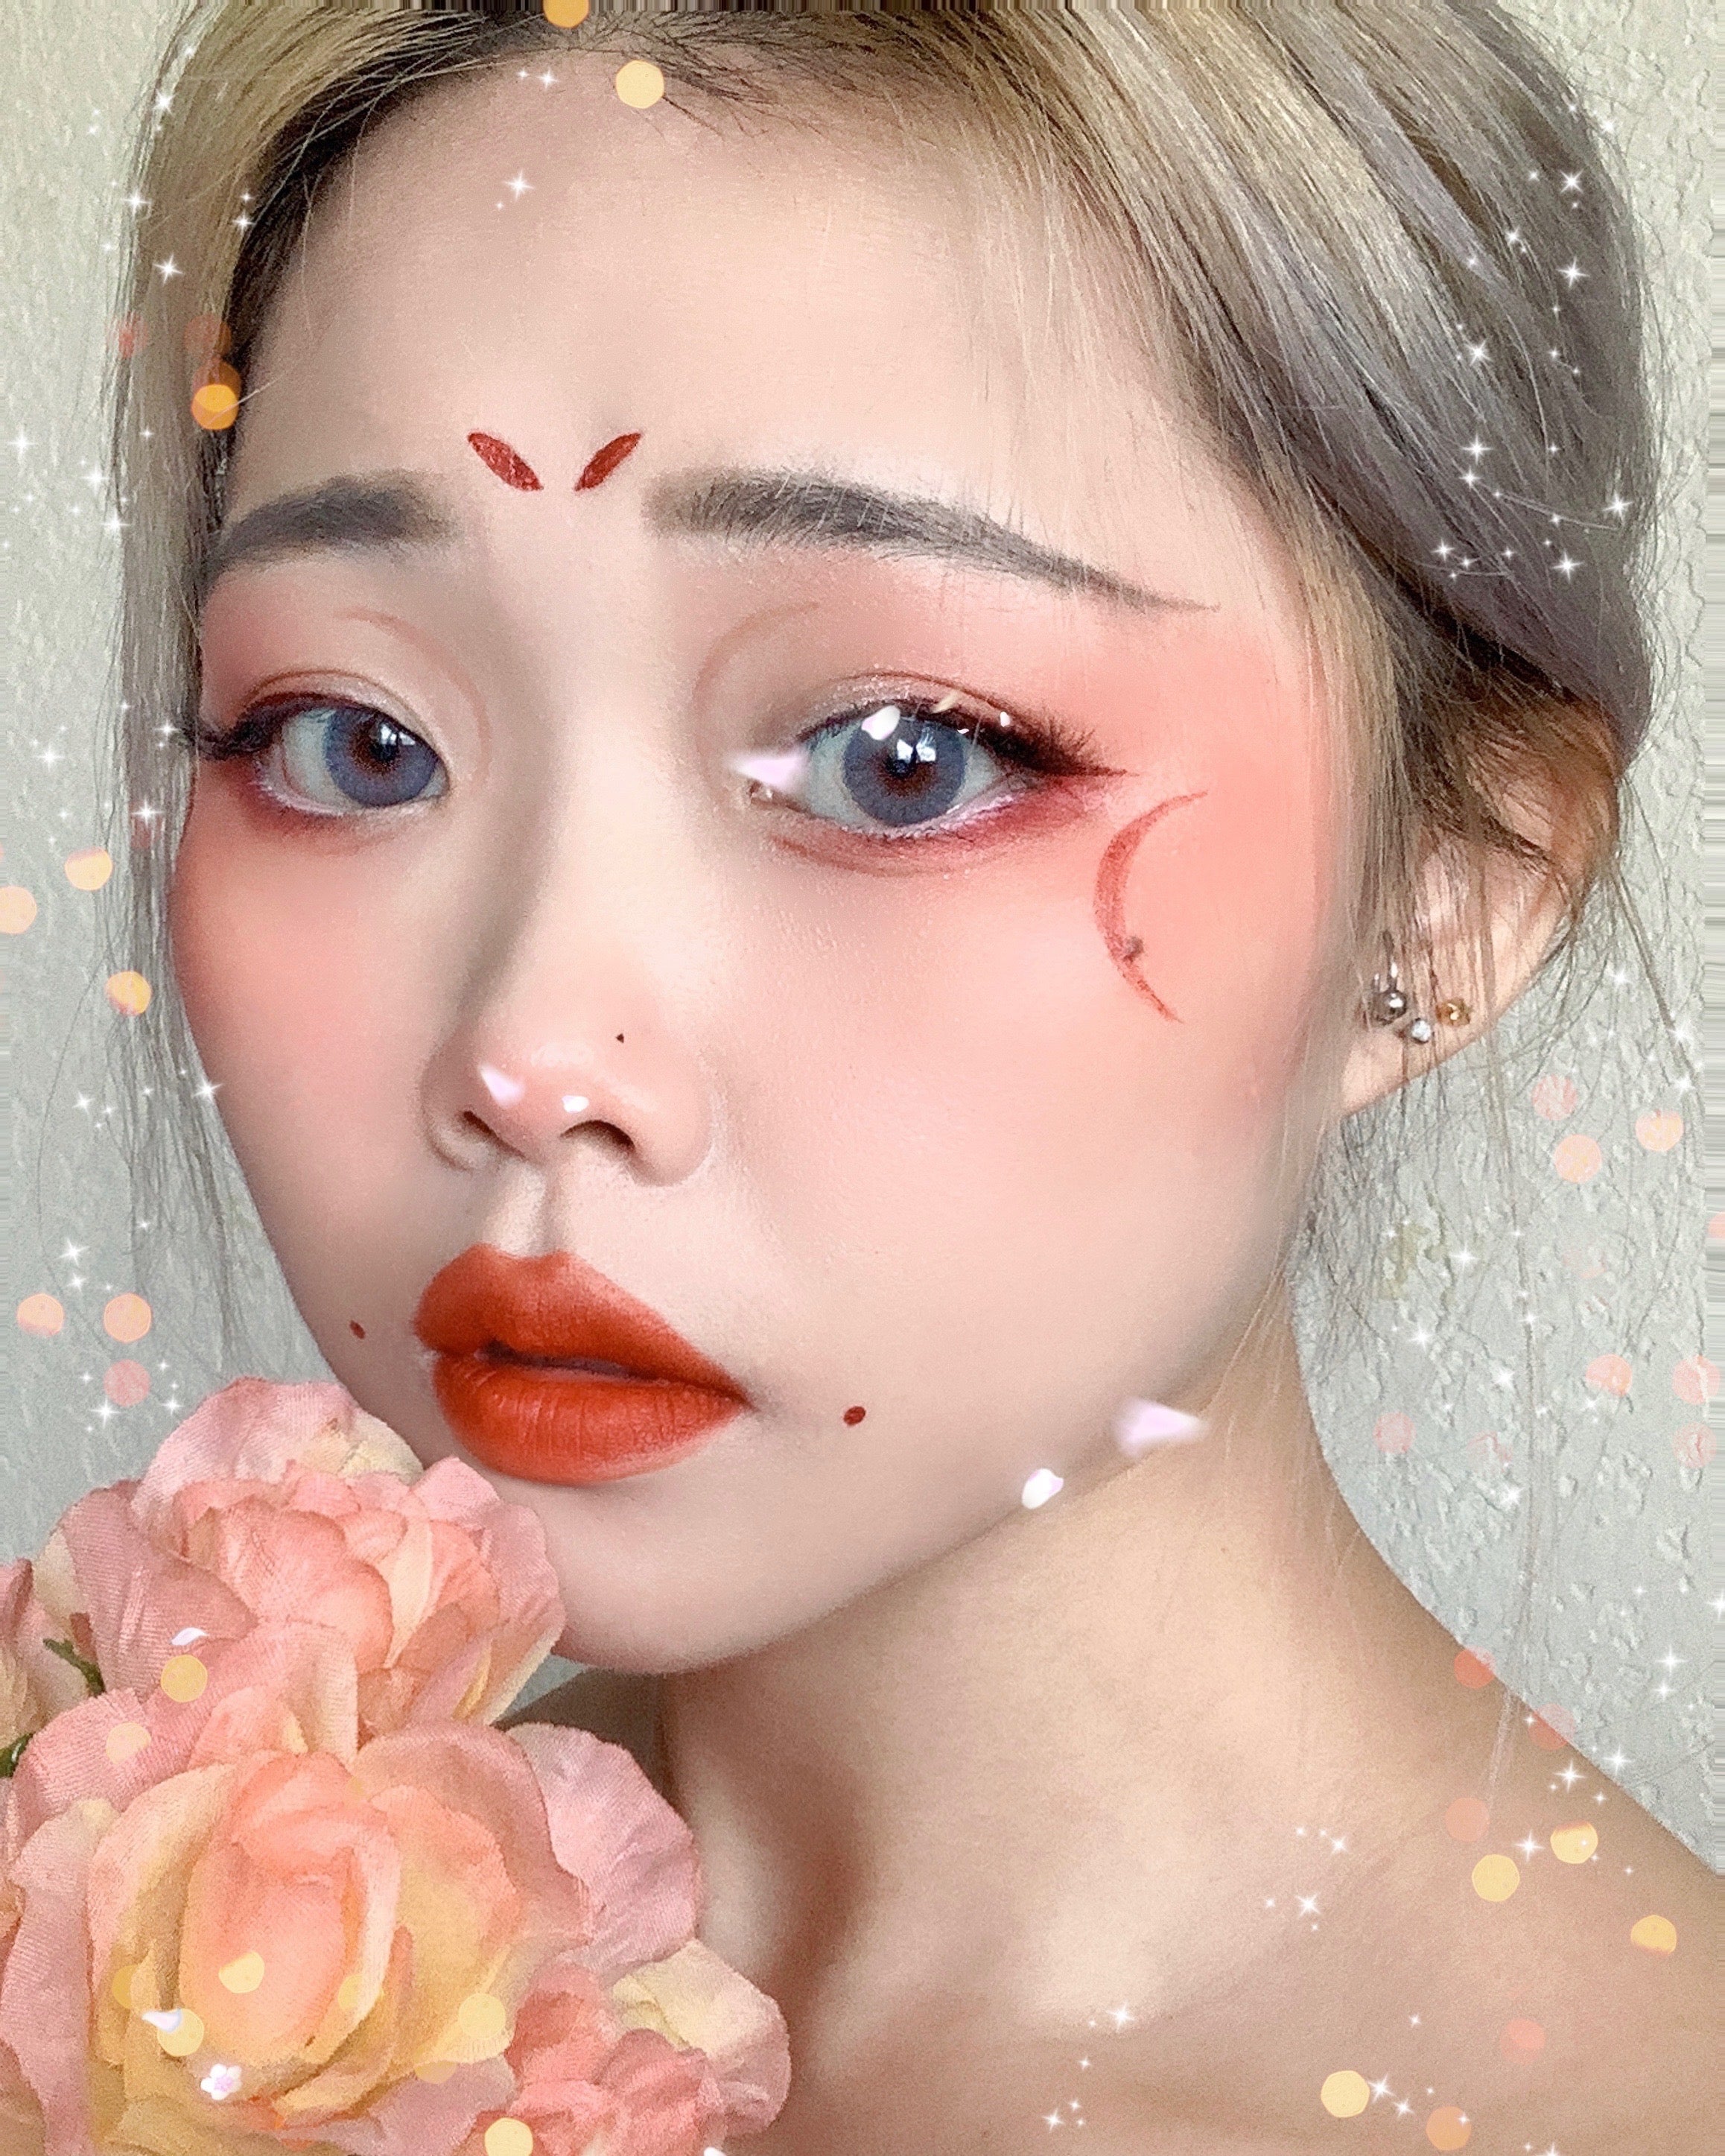 traditional chinese makeup styles